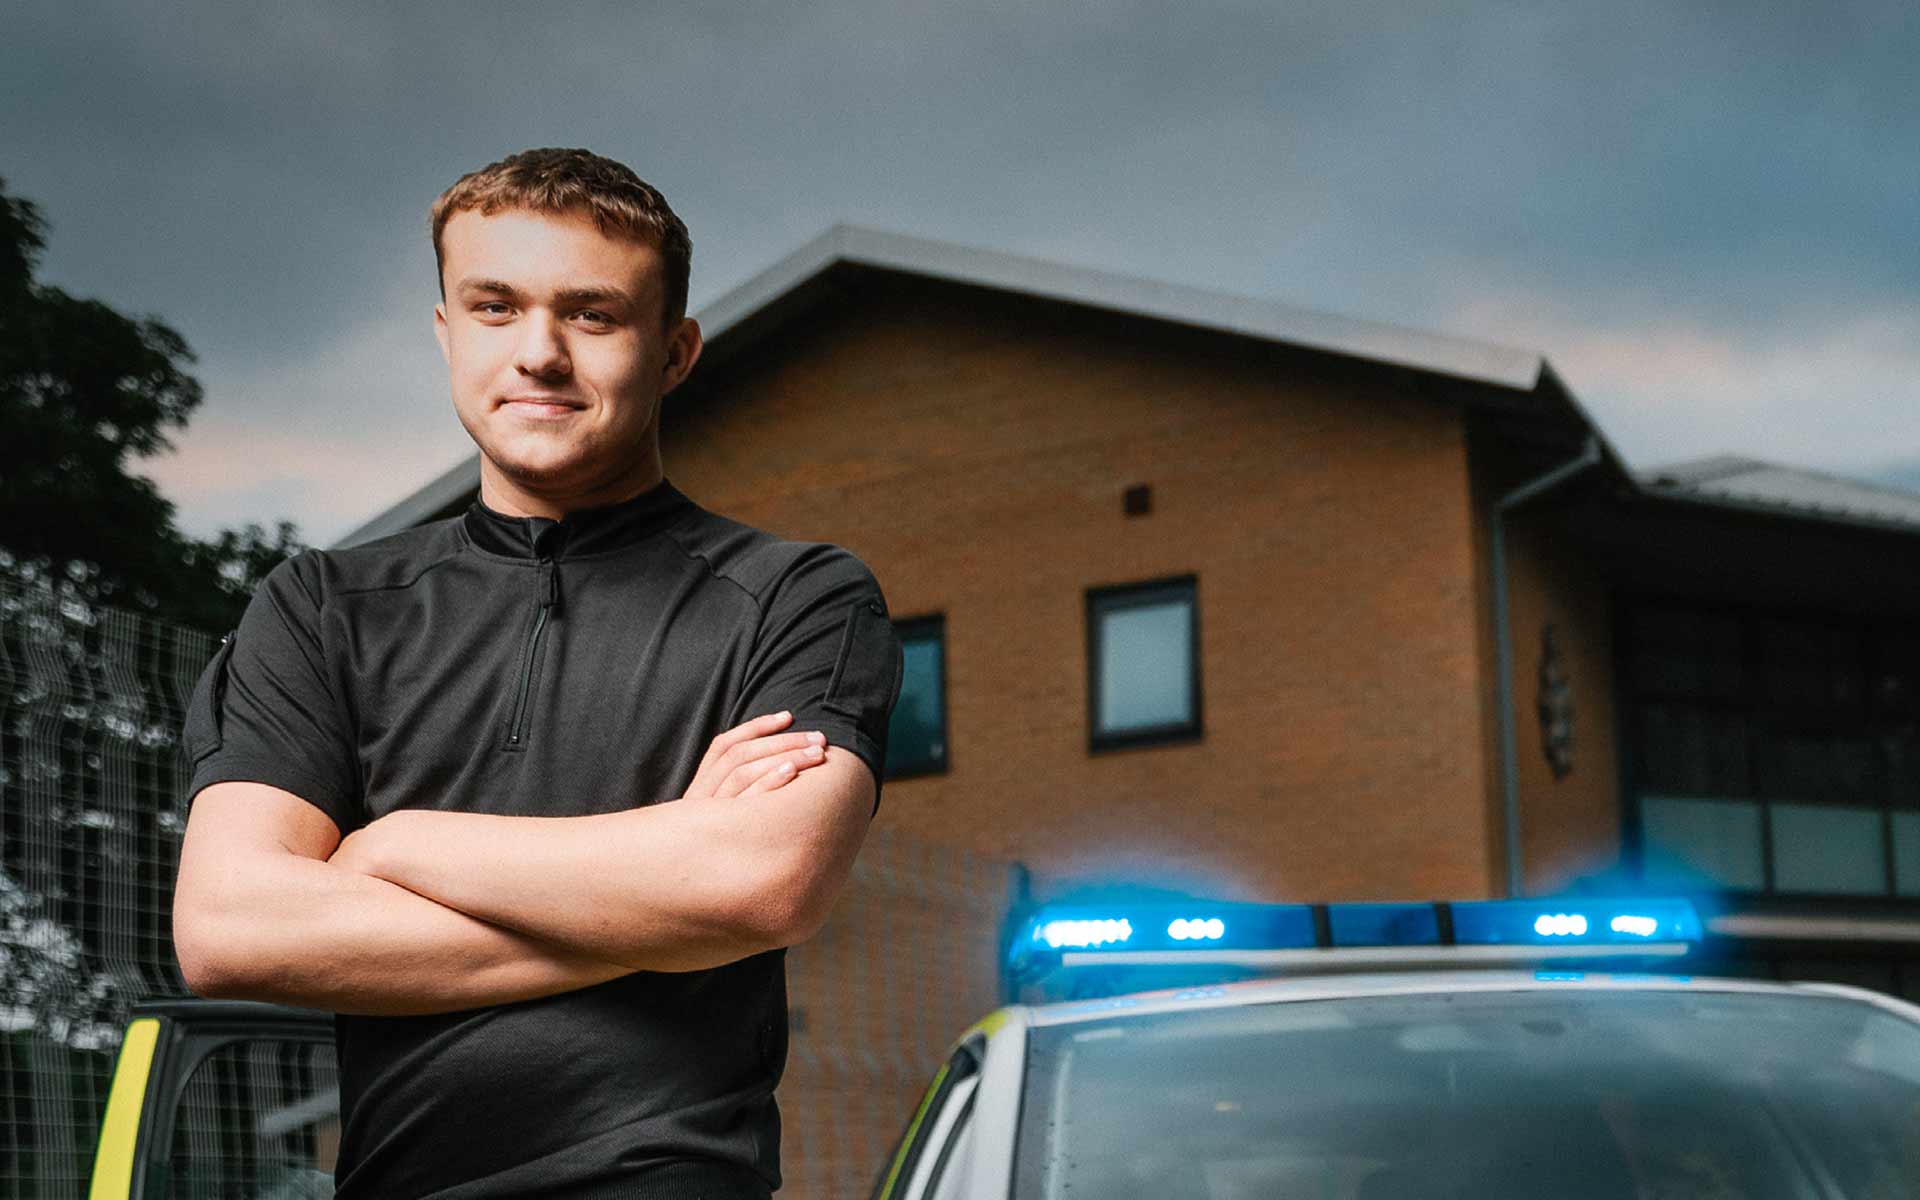 Stood with arms folded and smiling toward us, Kacper poses in front of a police station building. Close behind him, the top of a police car with blue lights glowing is parked with the driver side door open